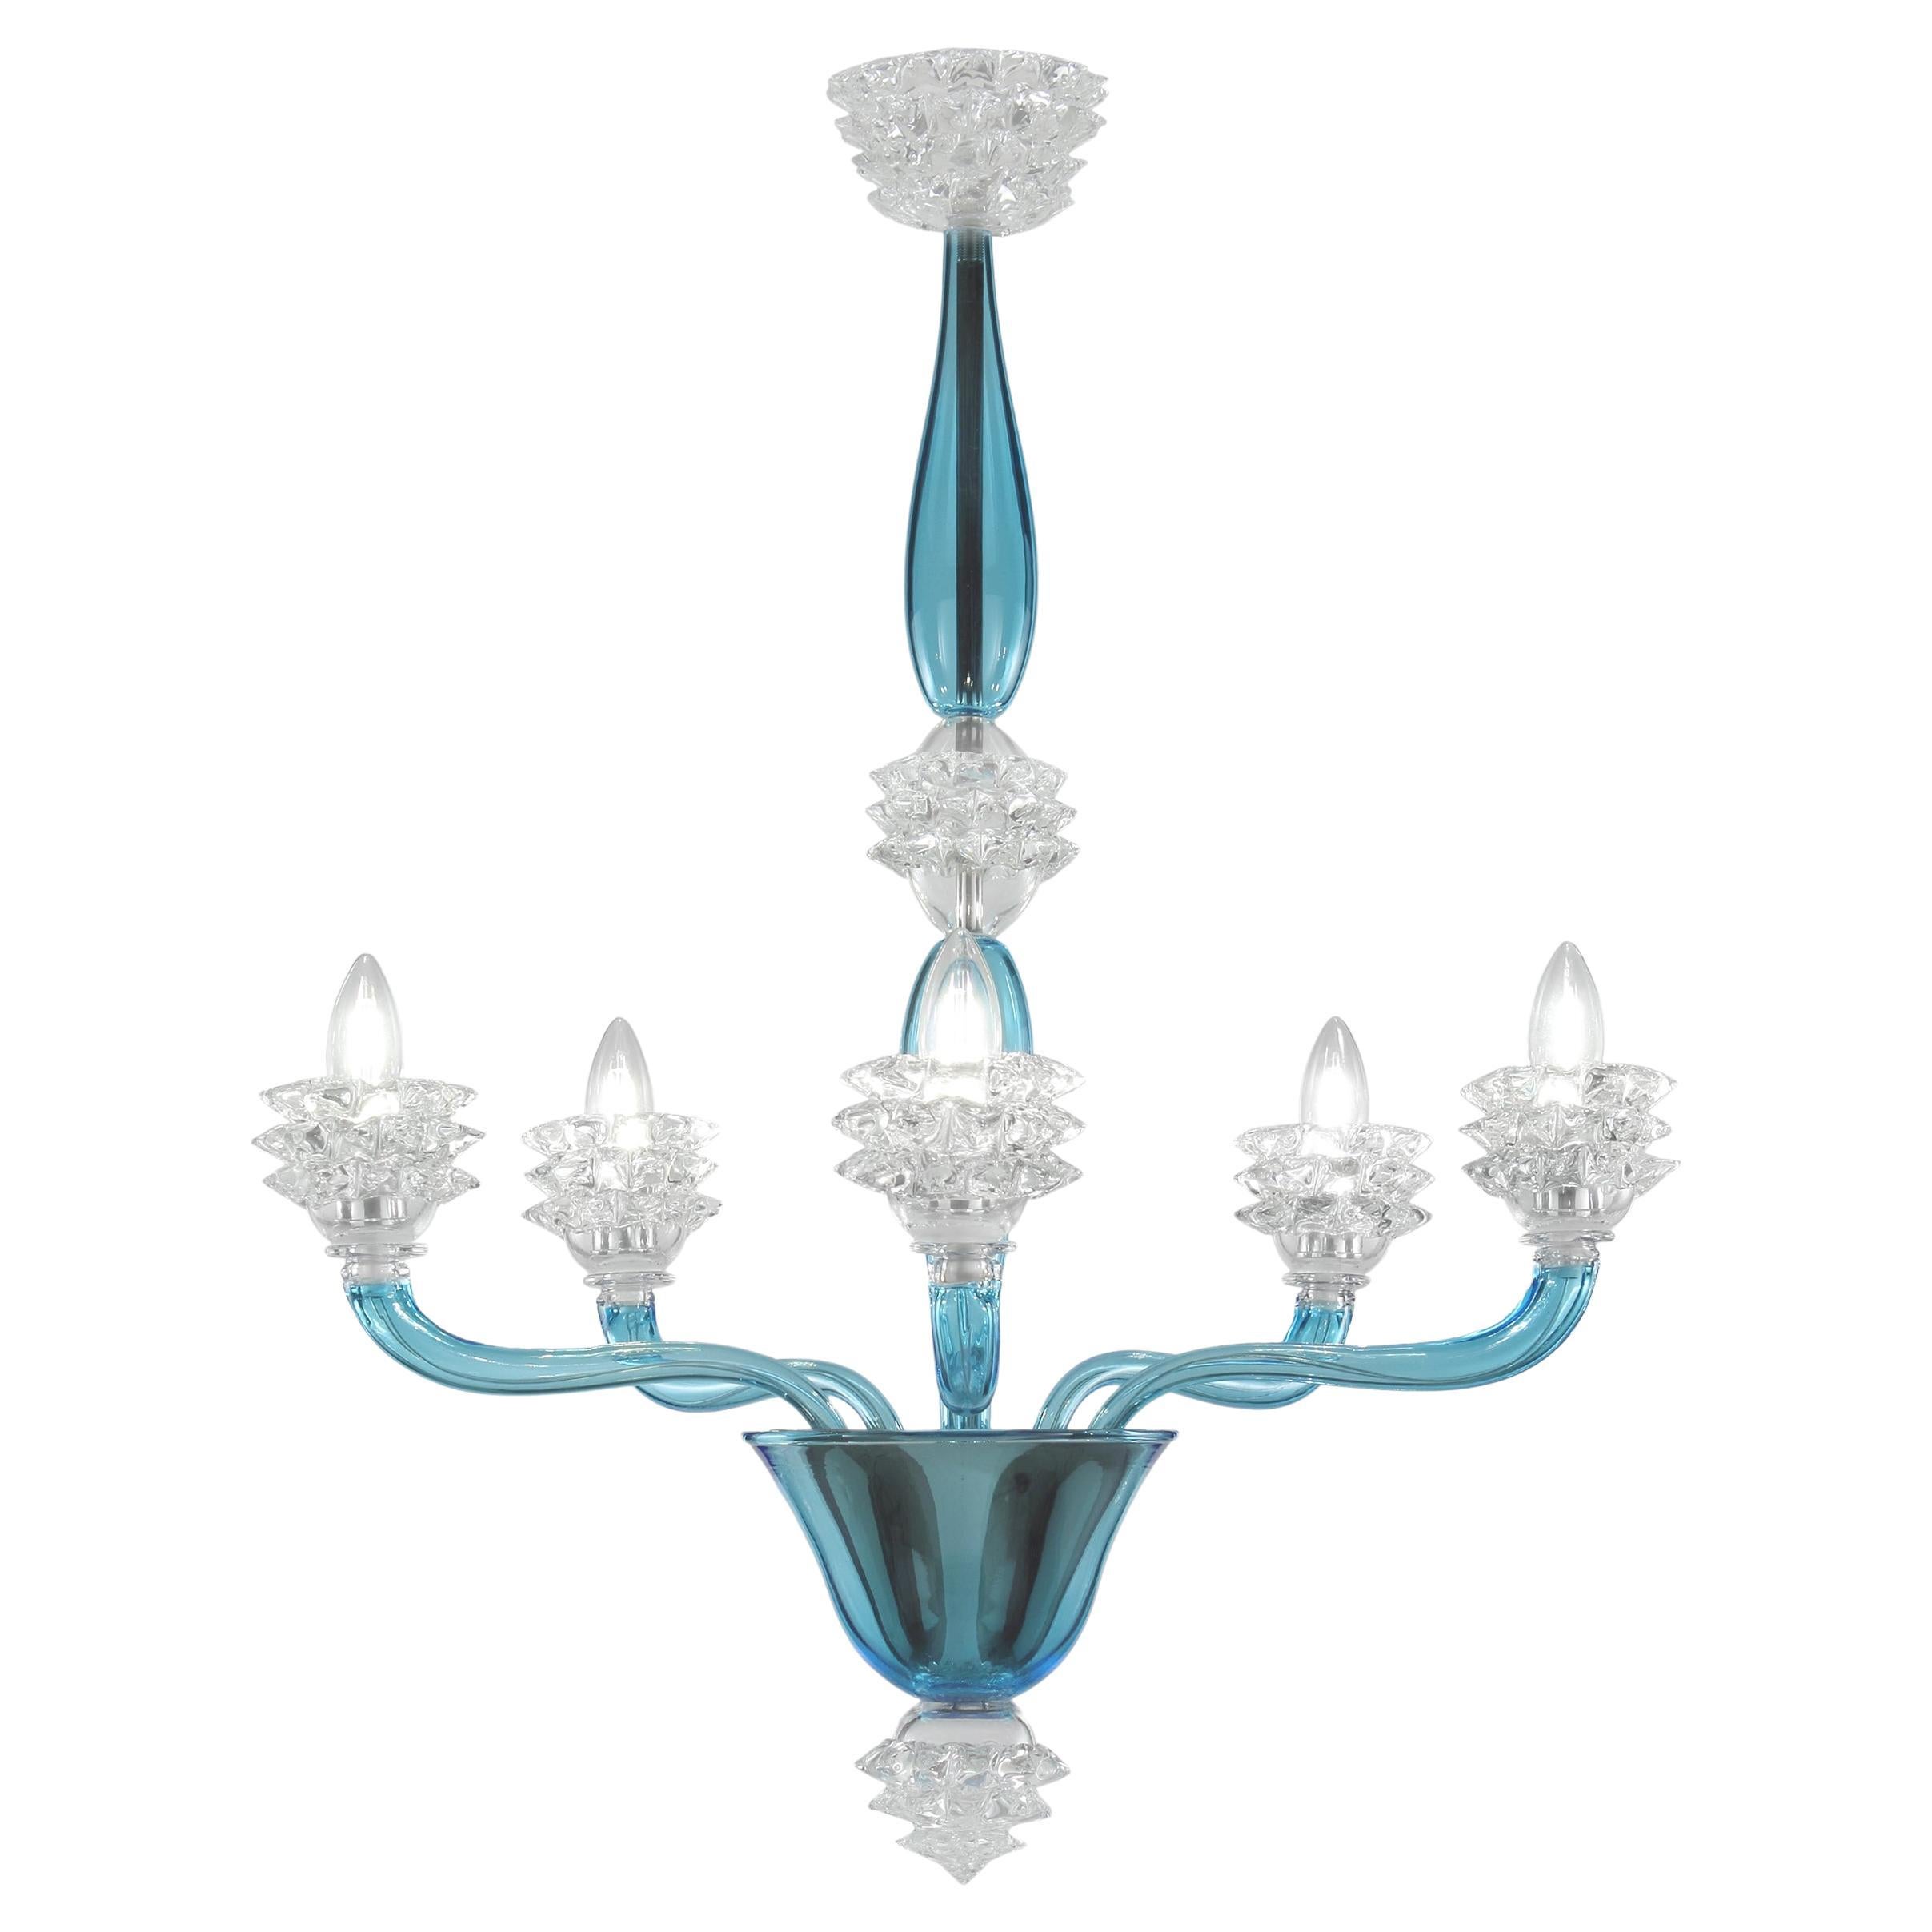 Italian Chandelier 5 arms Sky blue and clear Rostri Murano Glass by Multiforme For Sale